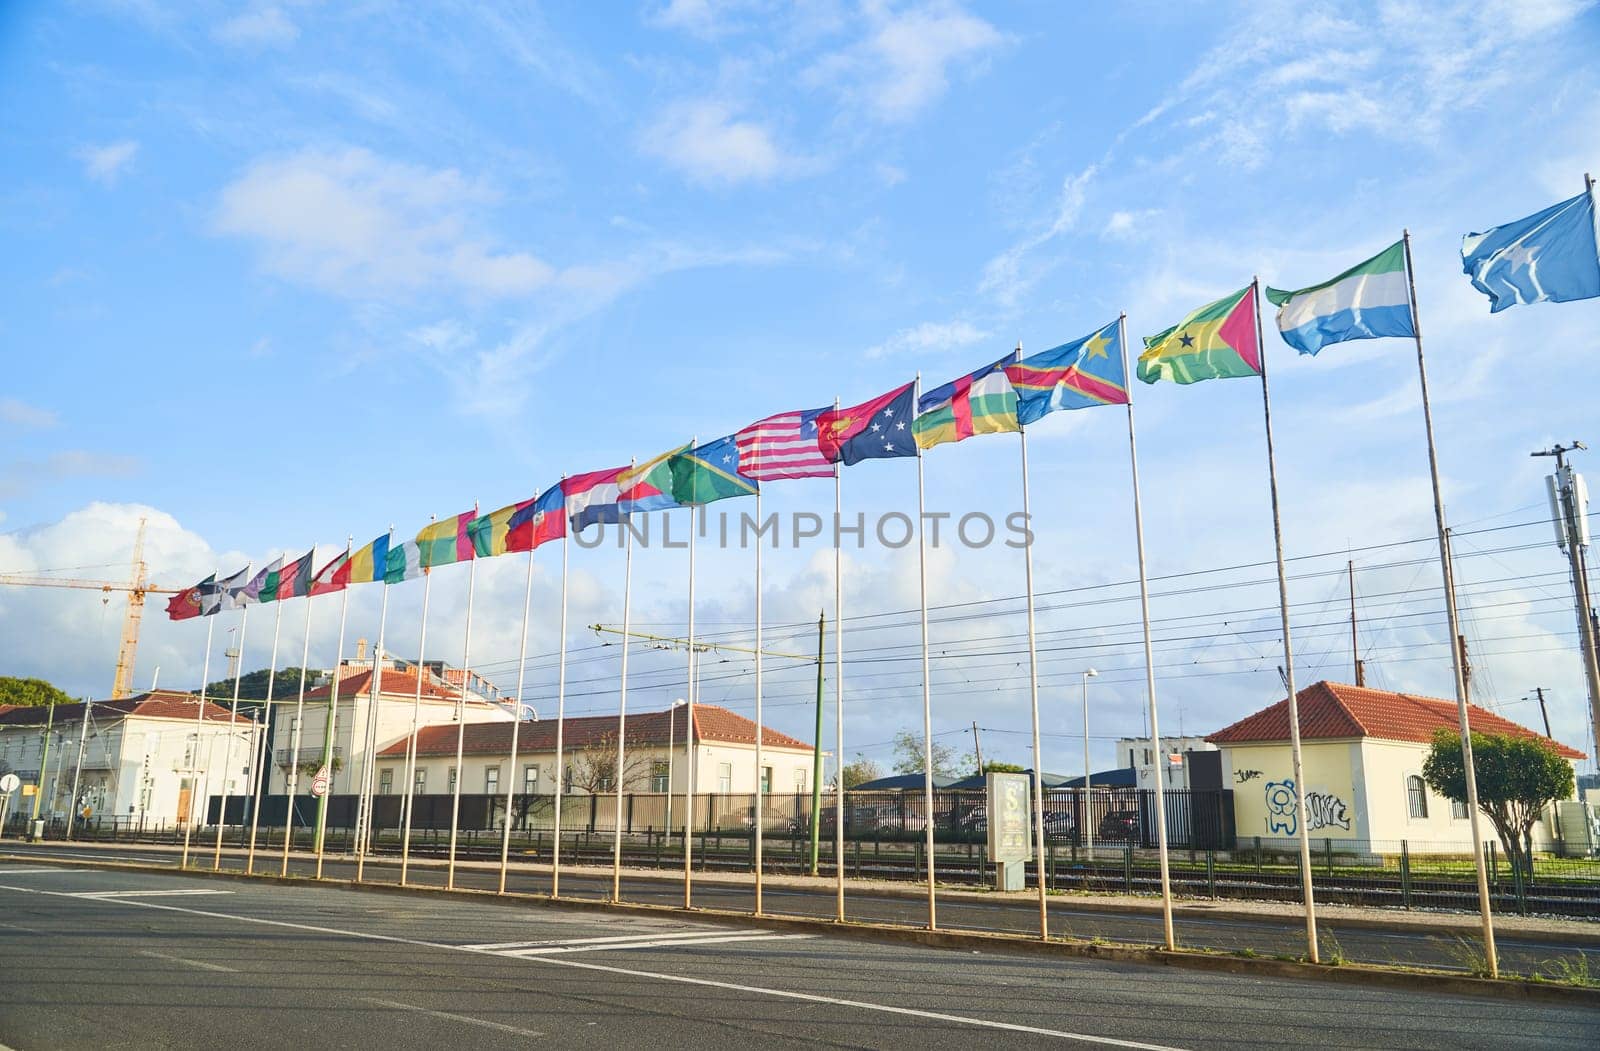 Flags hanged high in the air, fluttering against the cloudy sky, contrasting with the urban landscape of buildings and asphalt roads